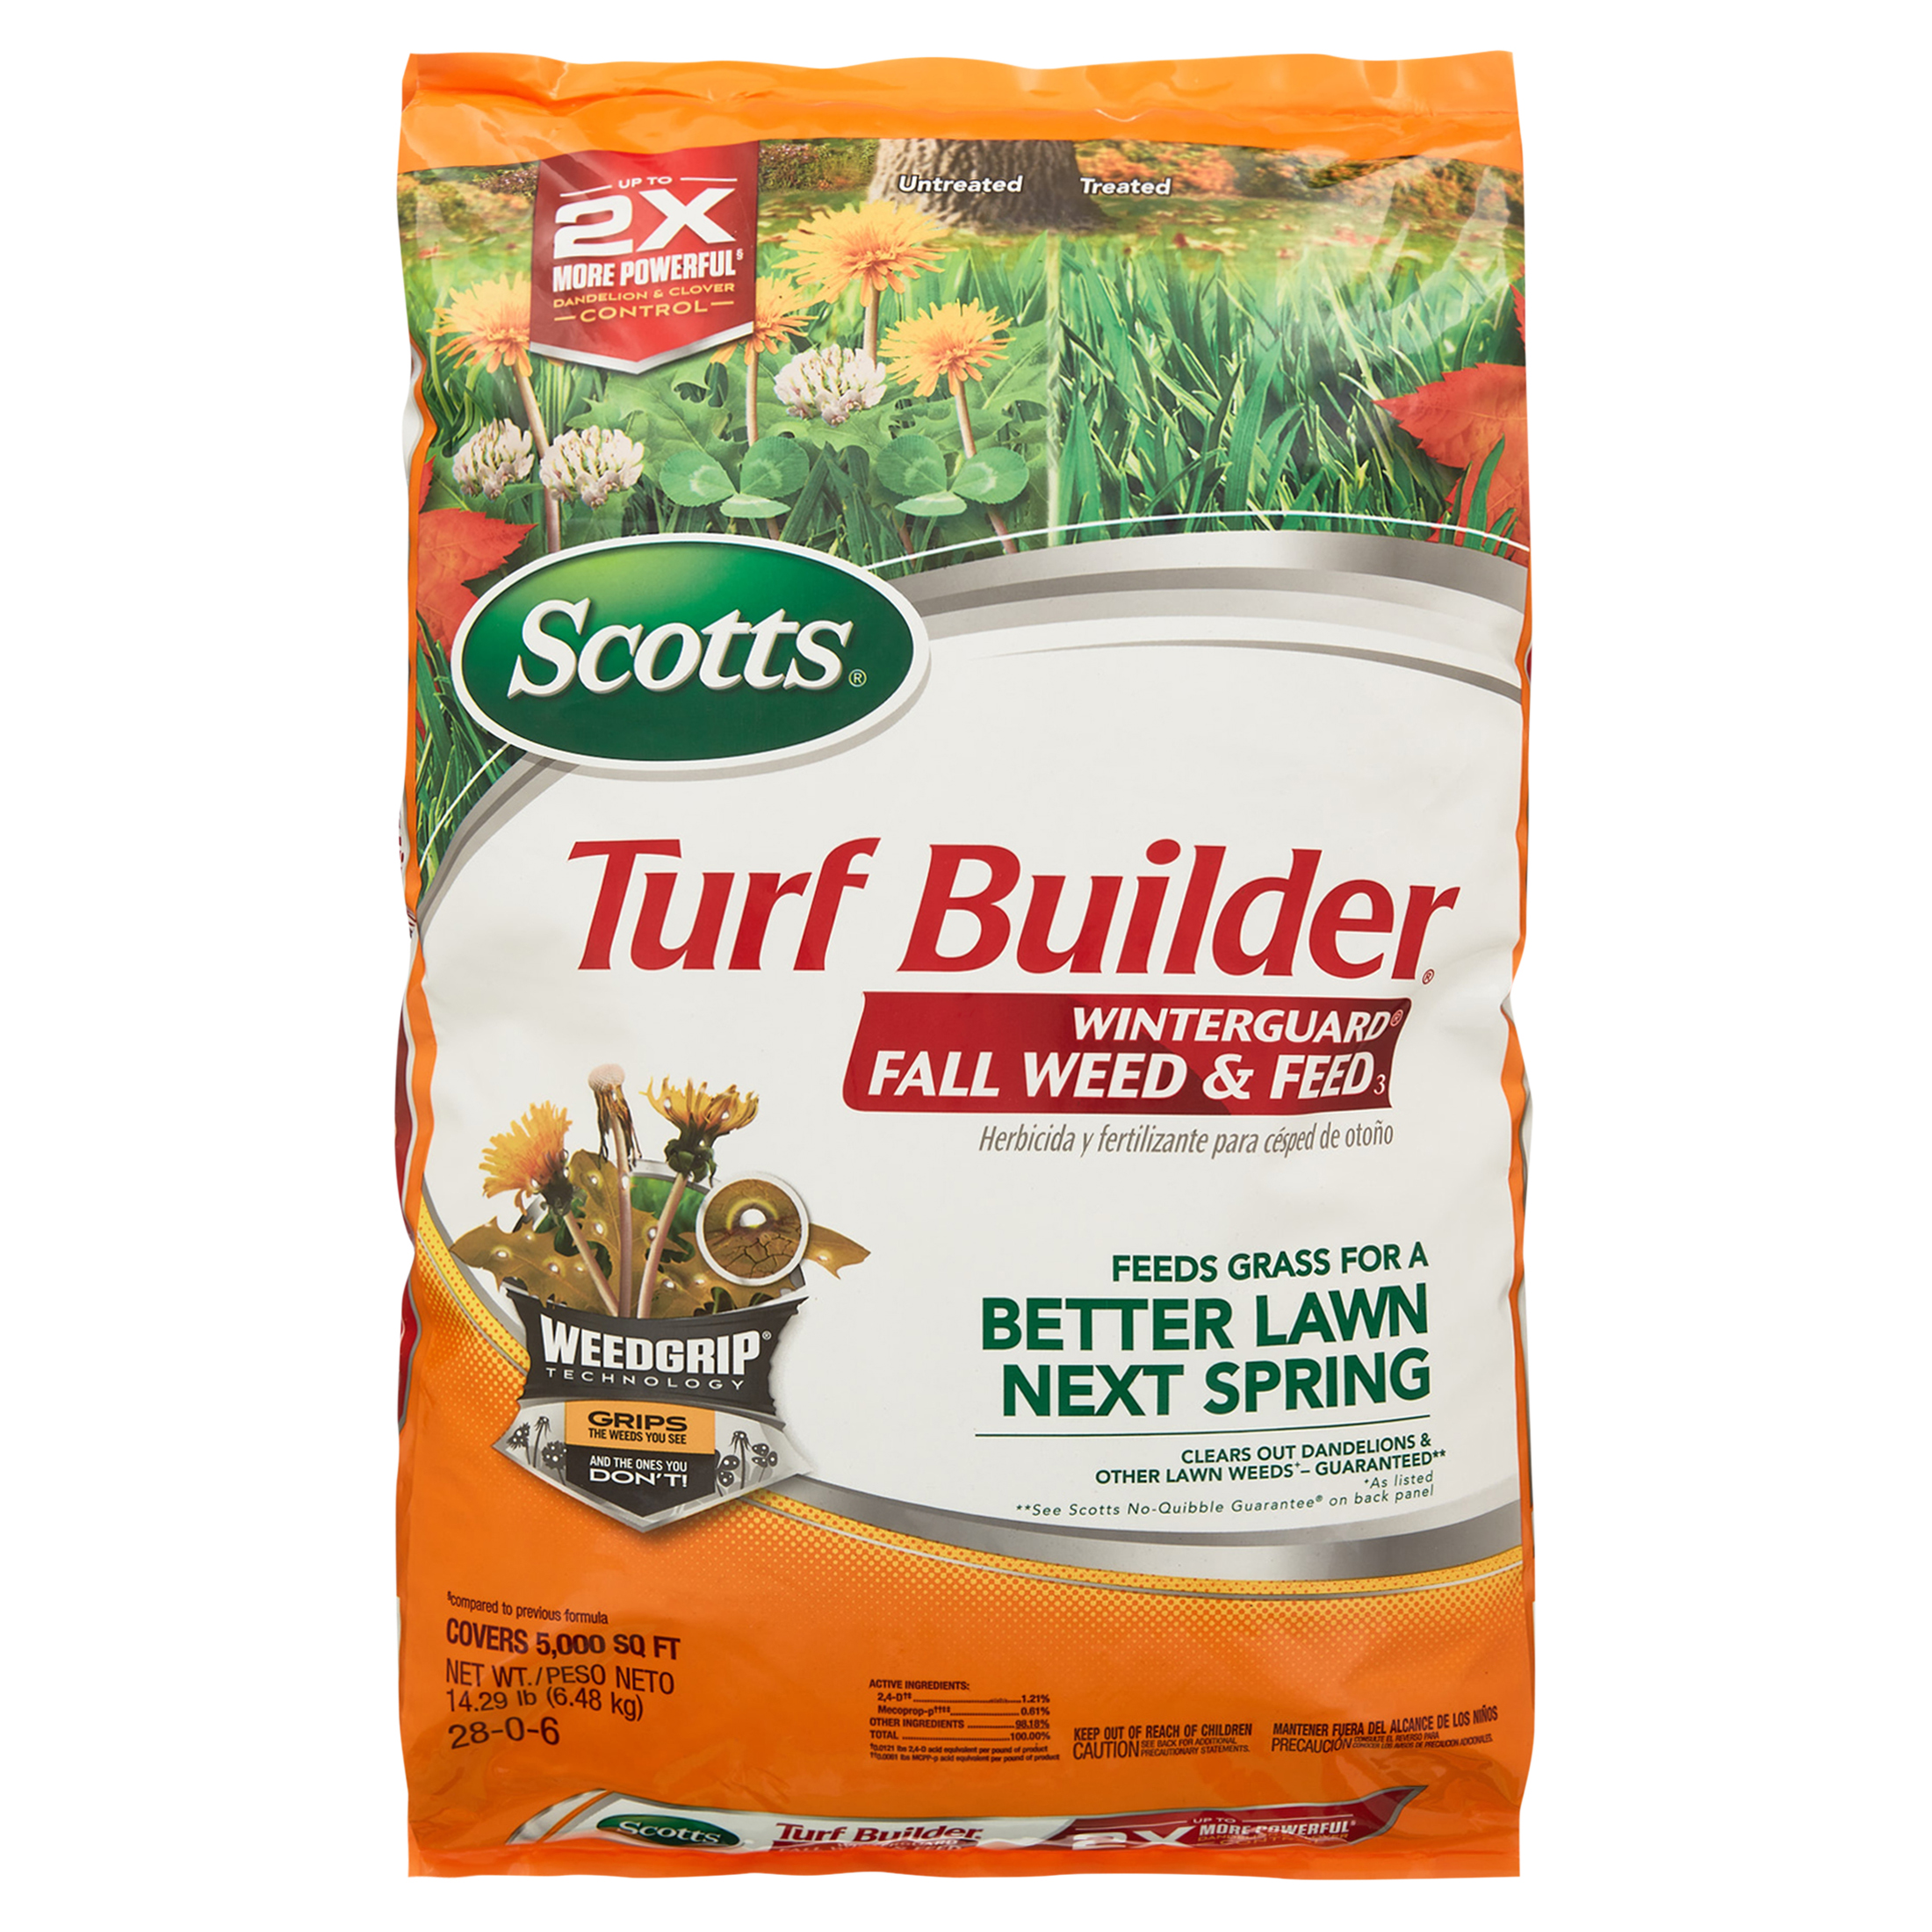 Scotts Turf Builder WinterGuard Fall Weed & Feed3, 14.29 lbs. - image 1 of 10